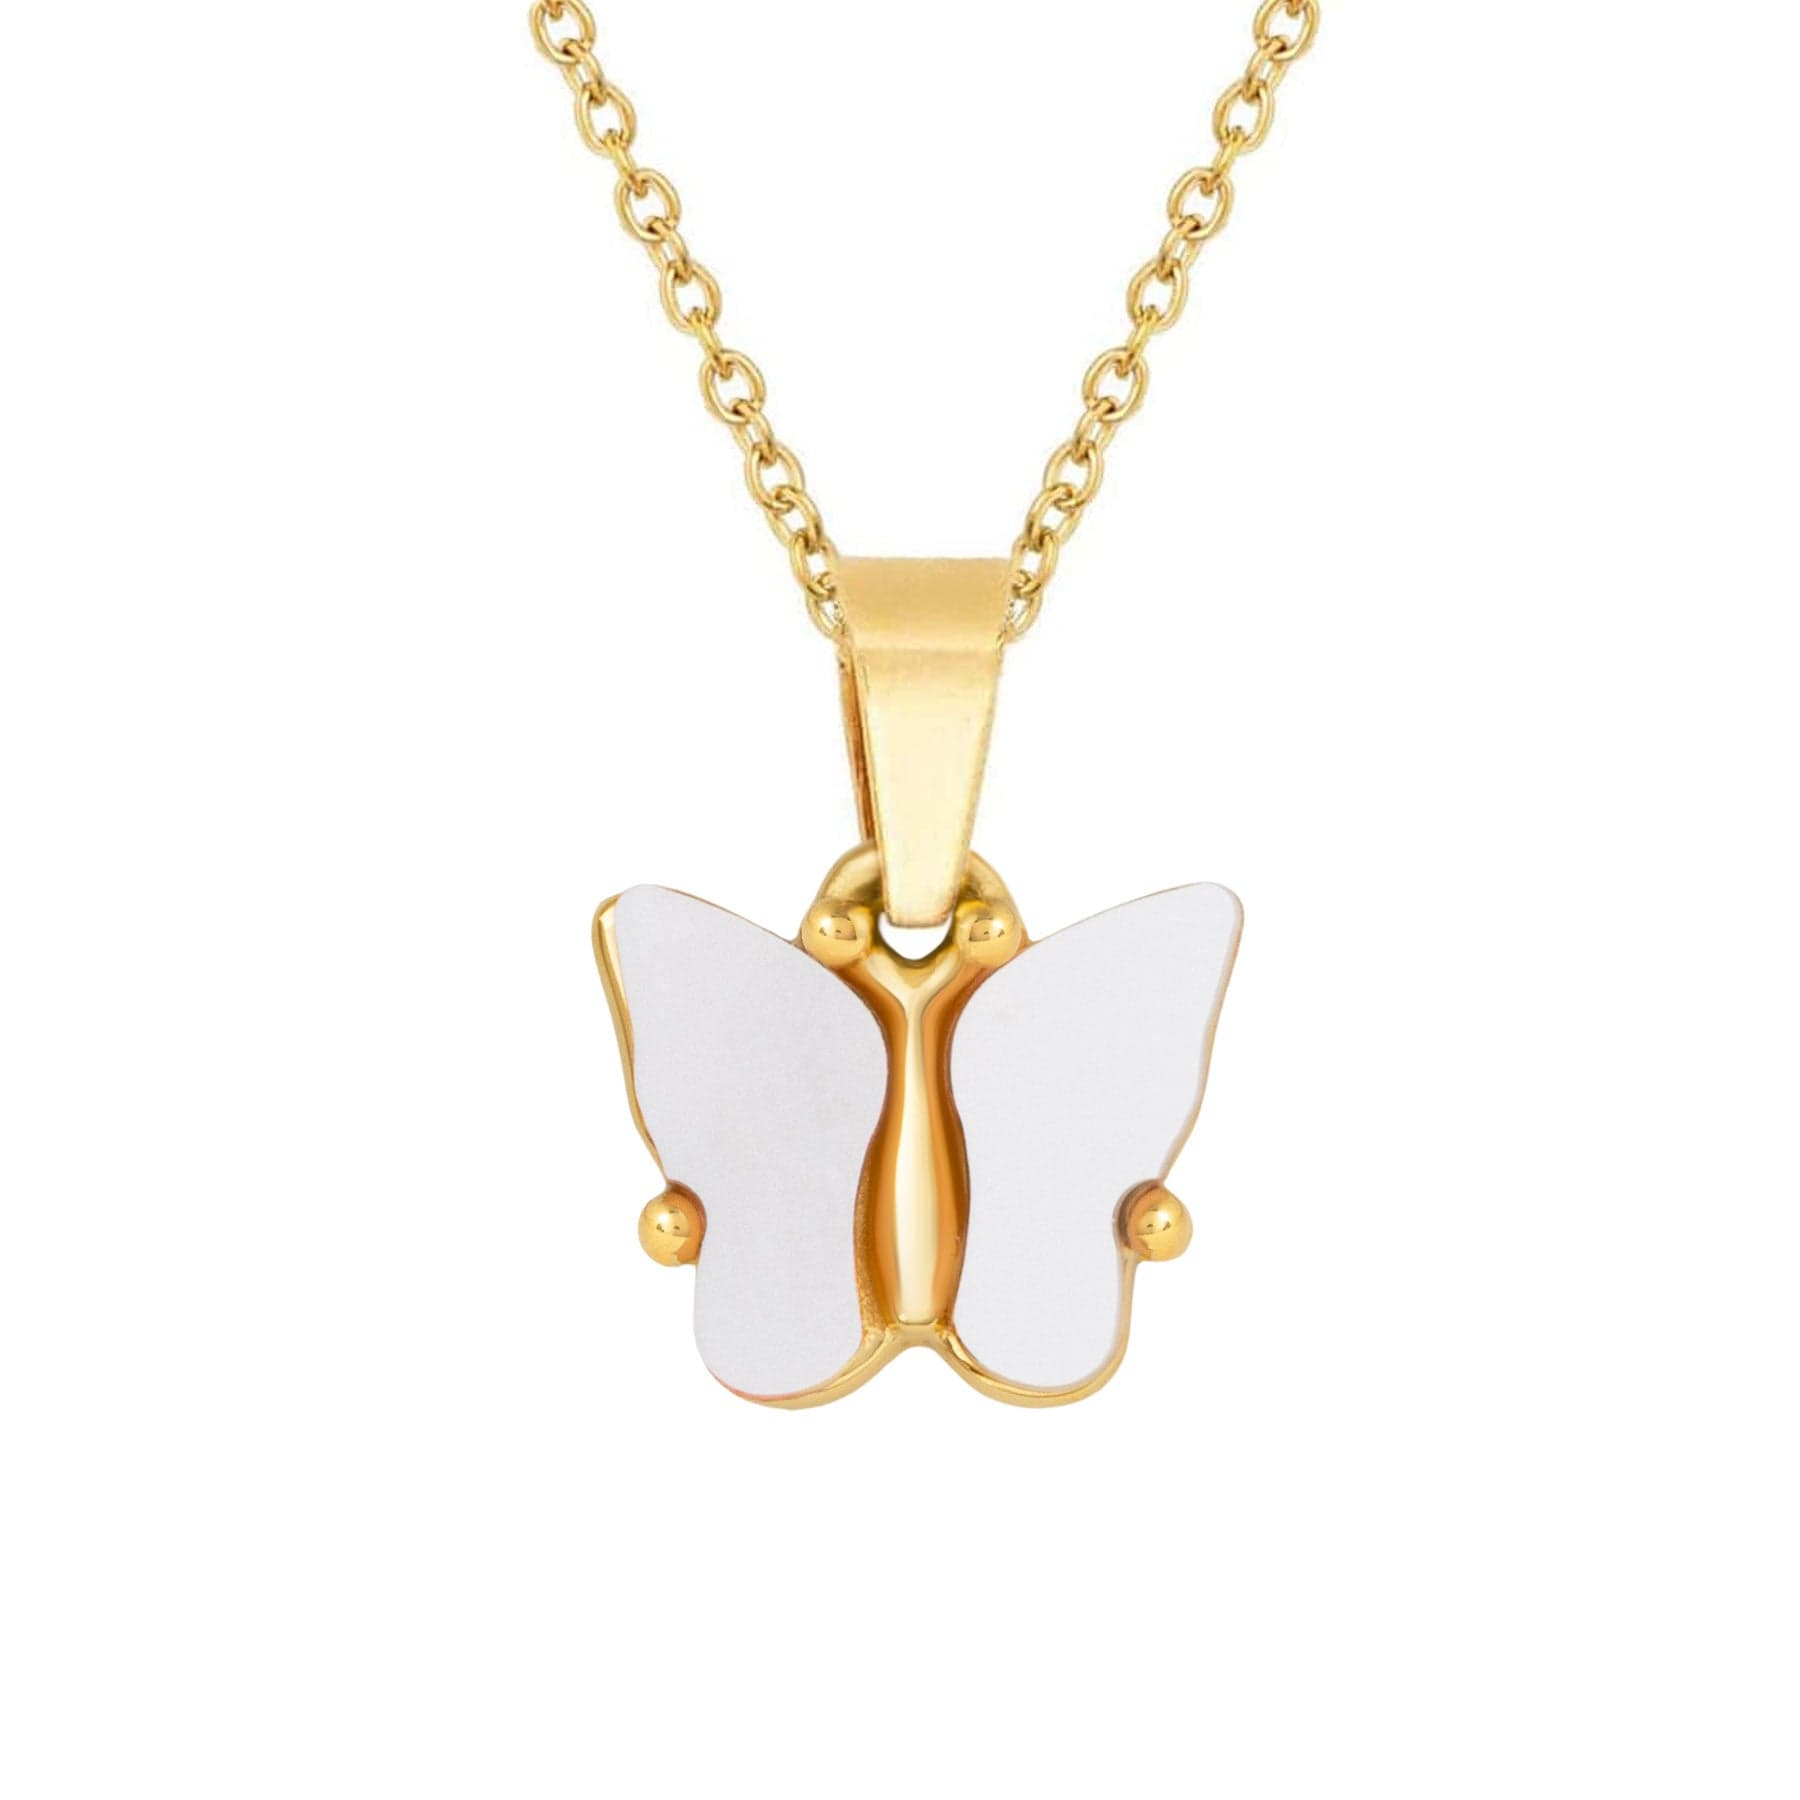 BohoMoon Stainless Steel Royale Butterfly Necklace Gold / White